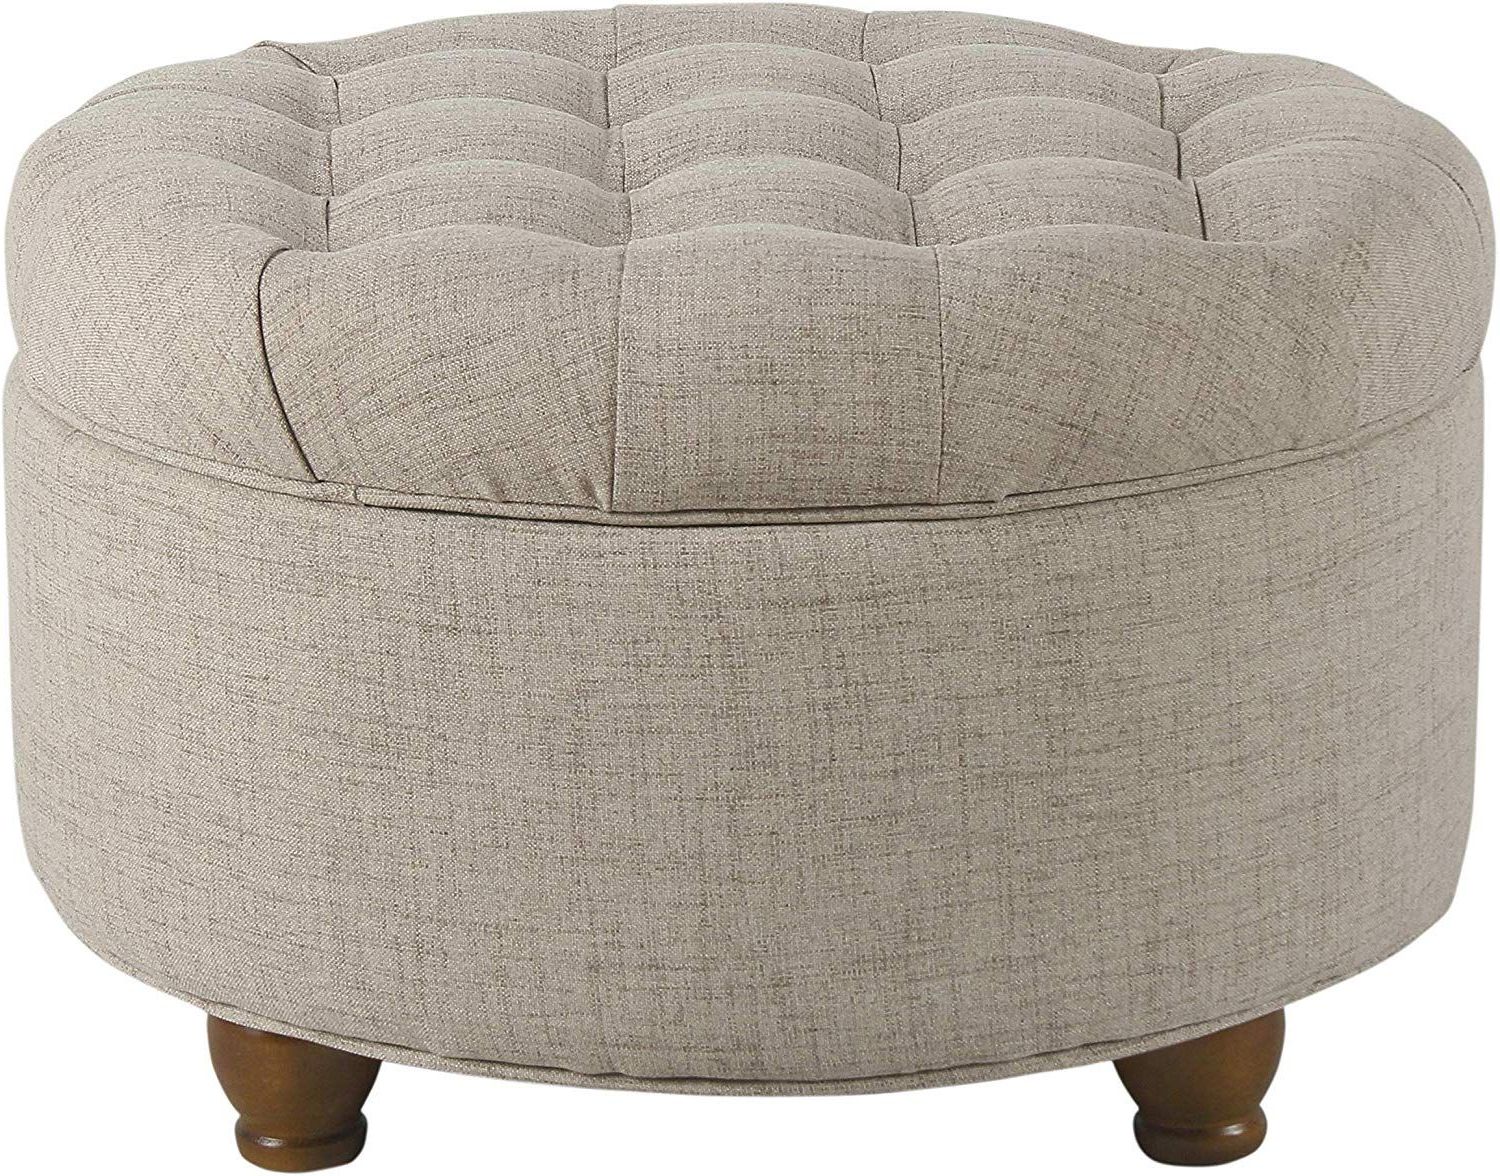 Amazonsmile: Homepop Large Button Tufted Round Storage Ottoman, Tan And With Best And Newest Round Cream Tasseled Ottomans (View 2 of 10)